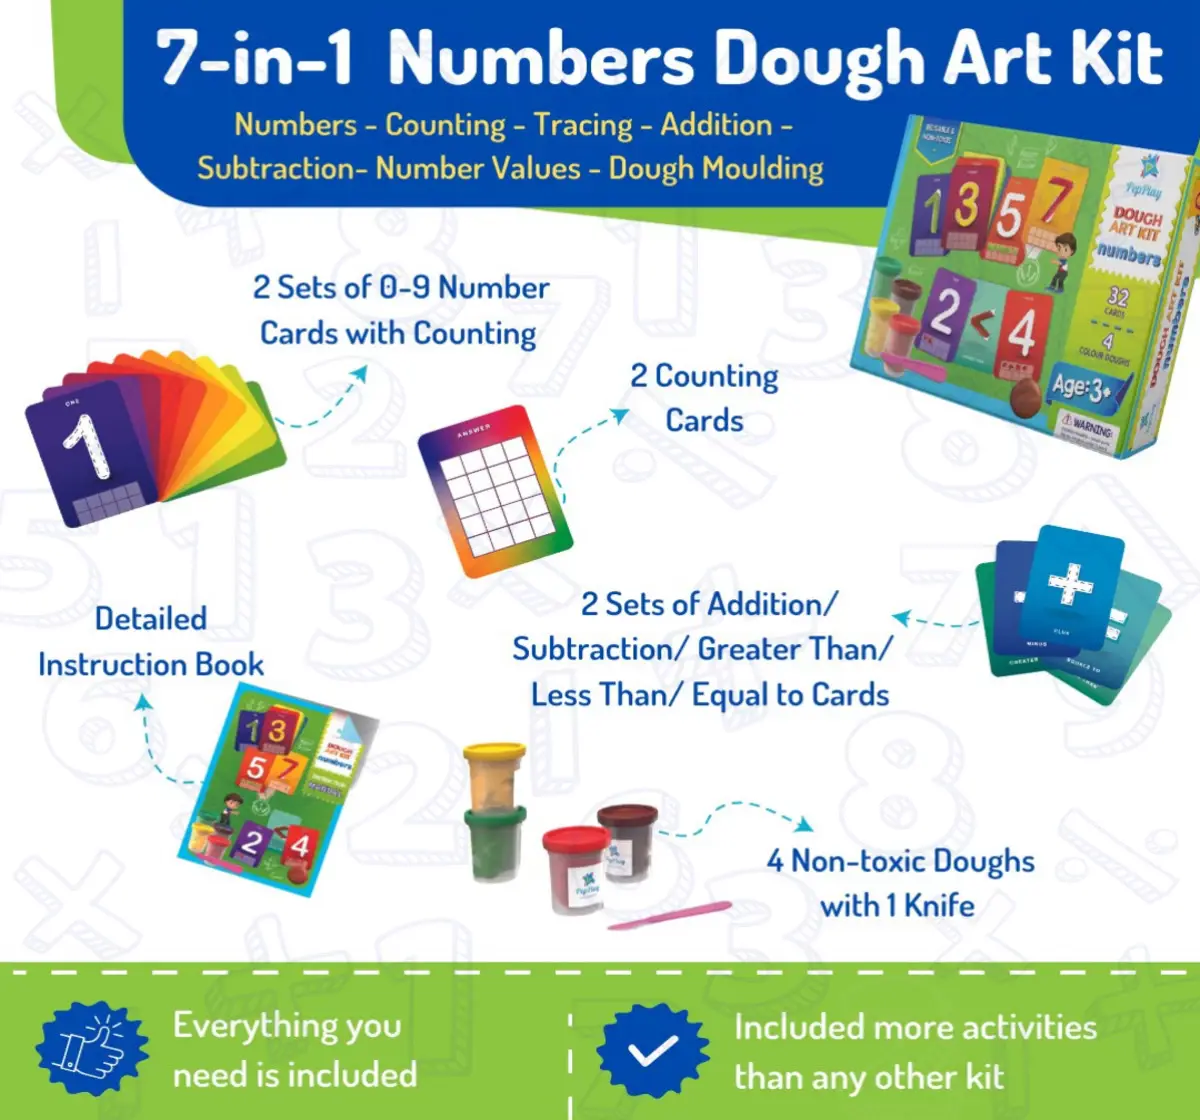 PepPlay Dough Art Kit Numbers For Kids of Age 3Y+, Multicolour